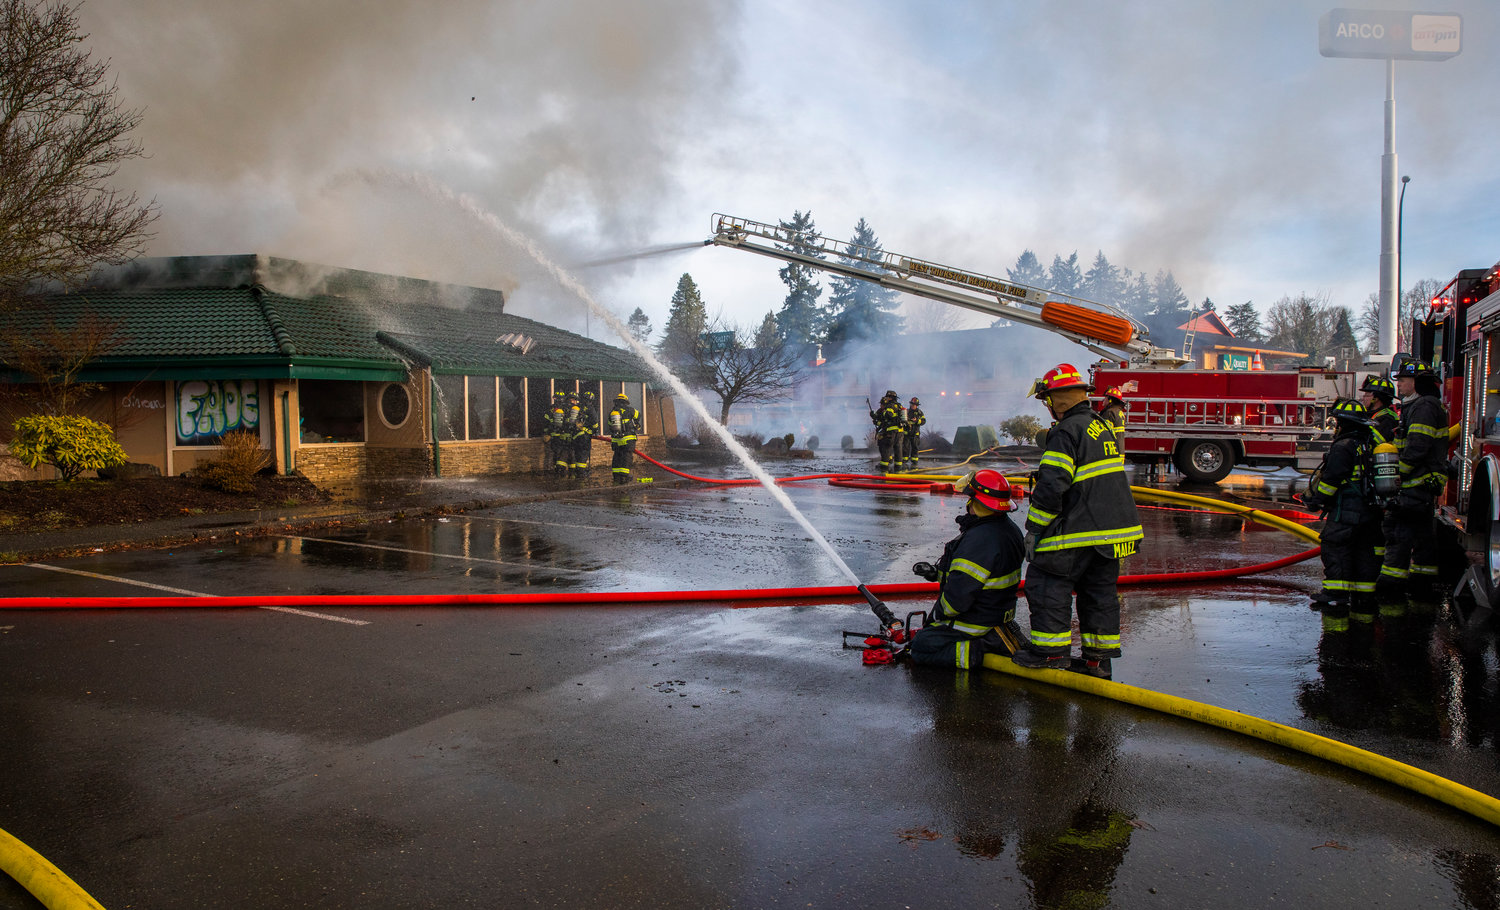 Crews work together to put out flames inside the former location of Papa Pete’s and Shari’s Cafe in Centralia on Sunday.